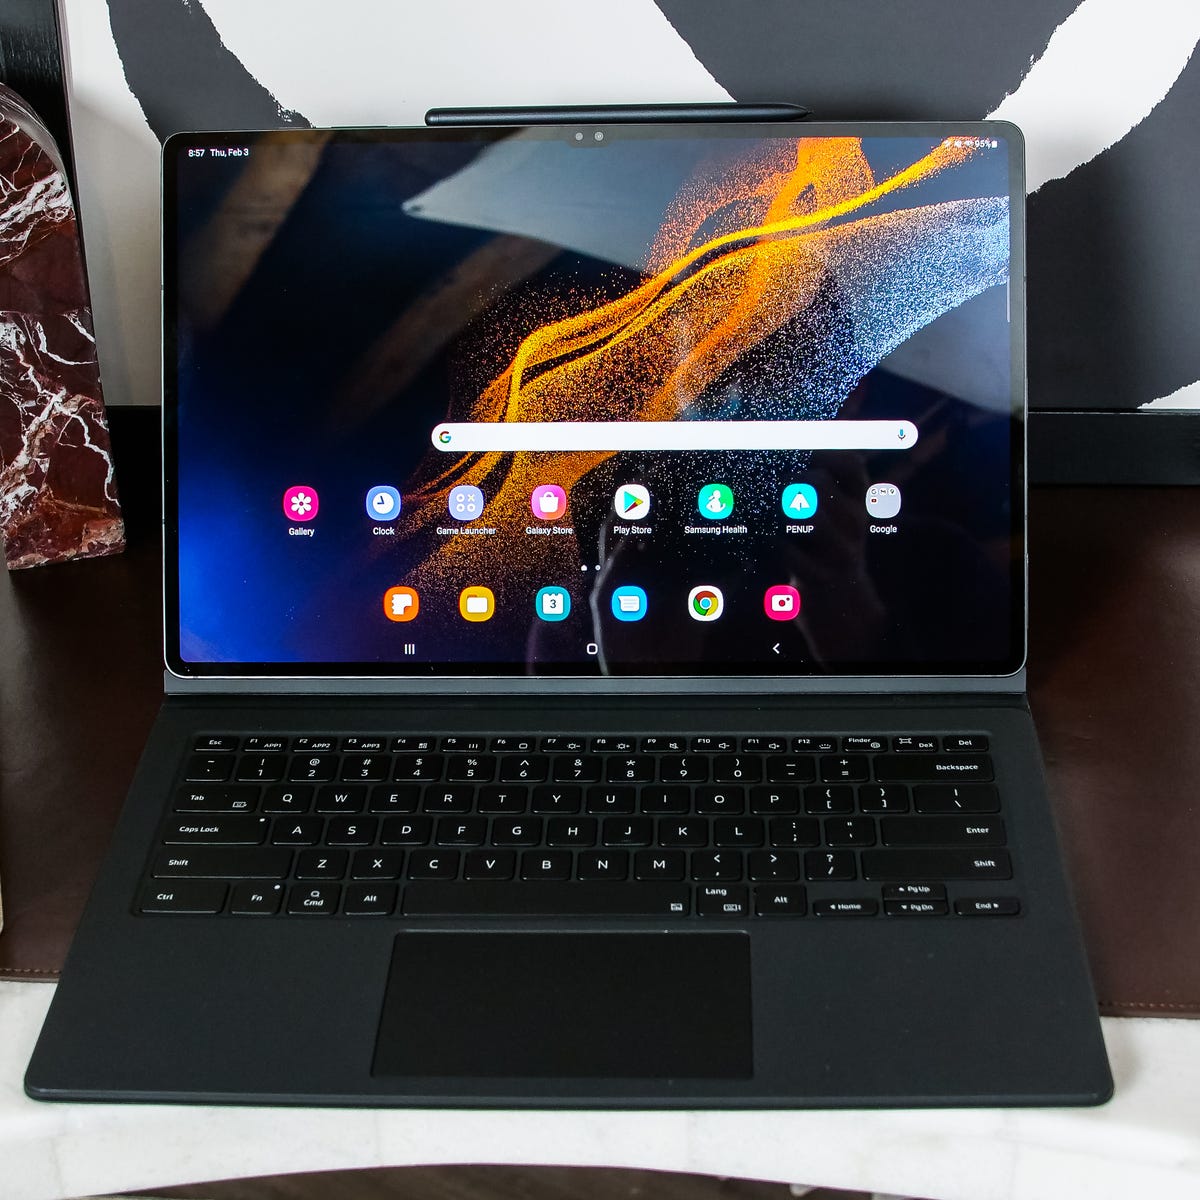 Samsung's Galaxy Tab S8 Ultra should have been a Chromebook - CNET